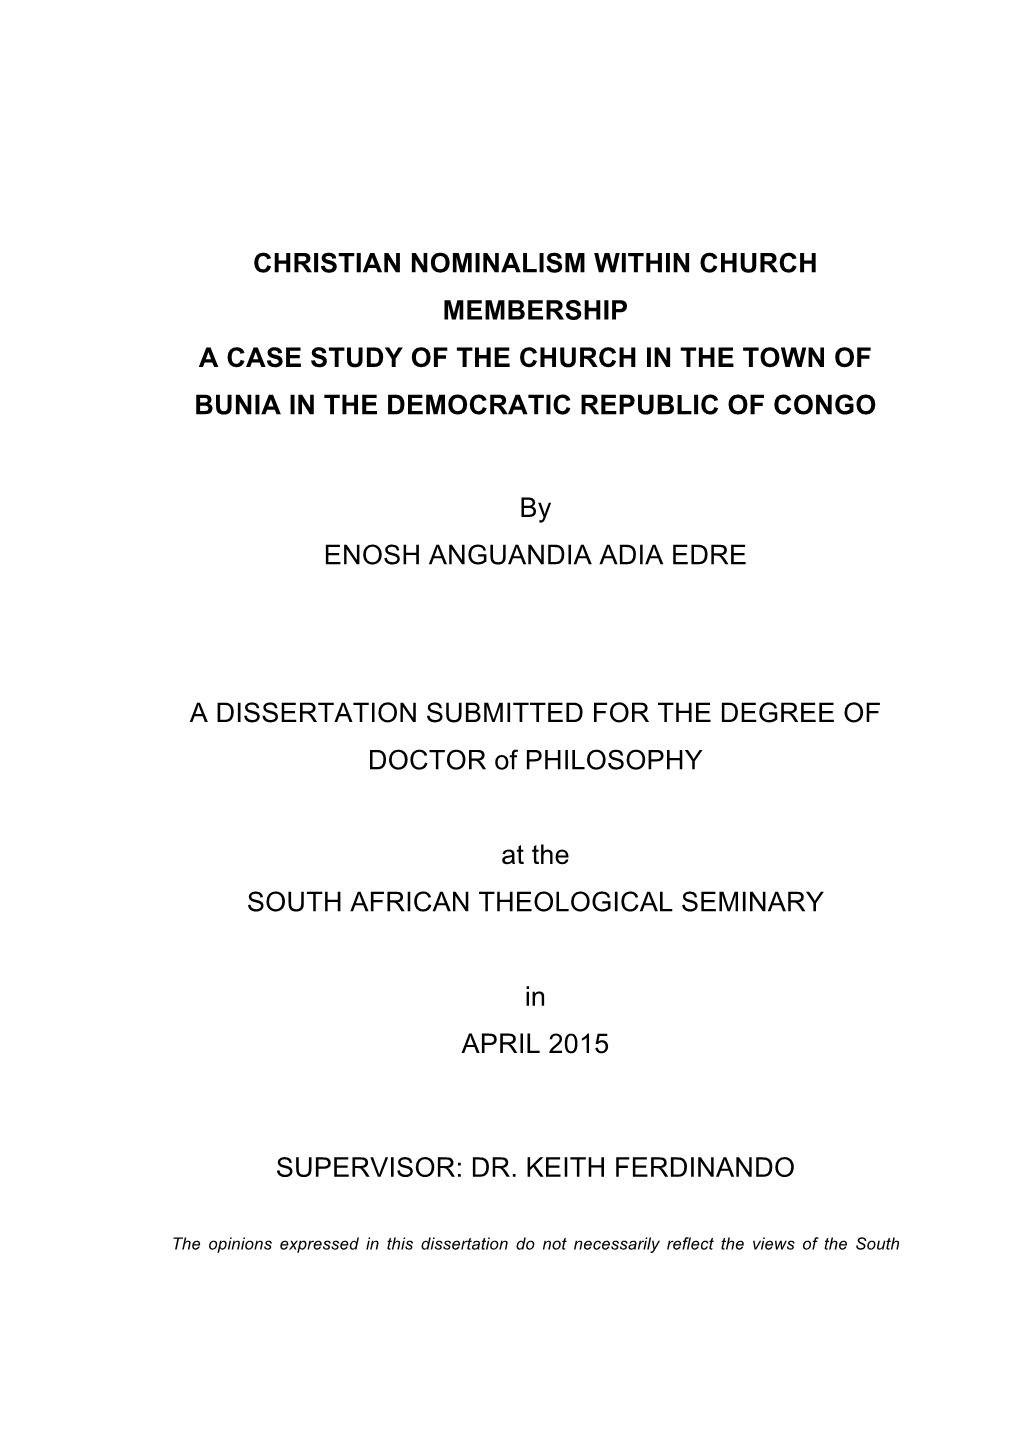 Christian Nominalism Within Church Membership a Case Study of the Church in the Town of Bunia in the Democratic Republic of Congo